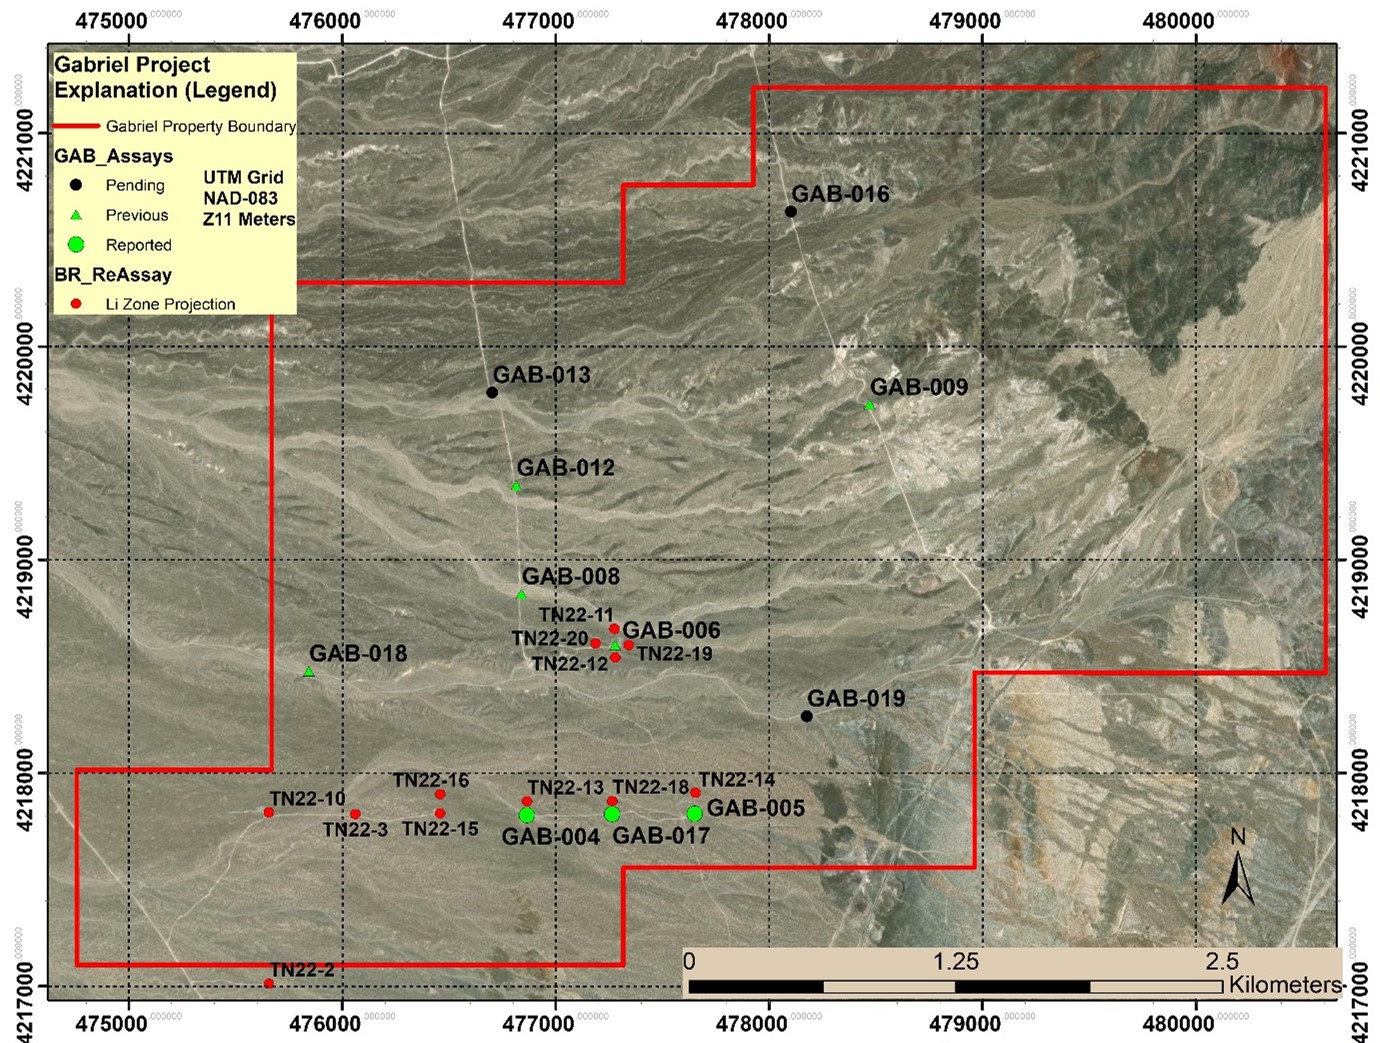 Location Map of GAB Drill Holes and Proposed BRS TN-22 Holes to Re-assay